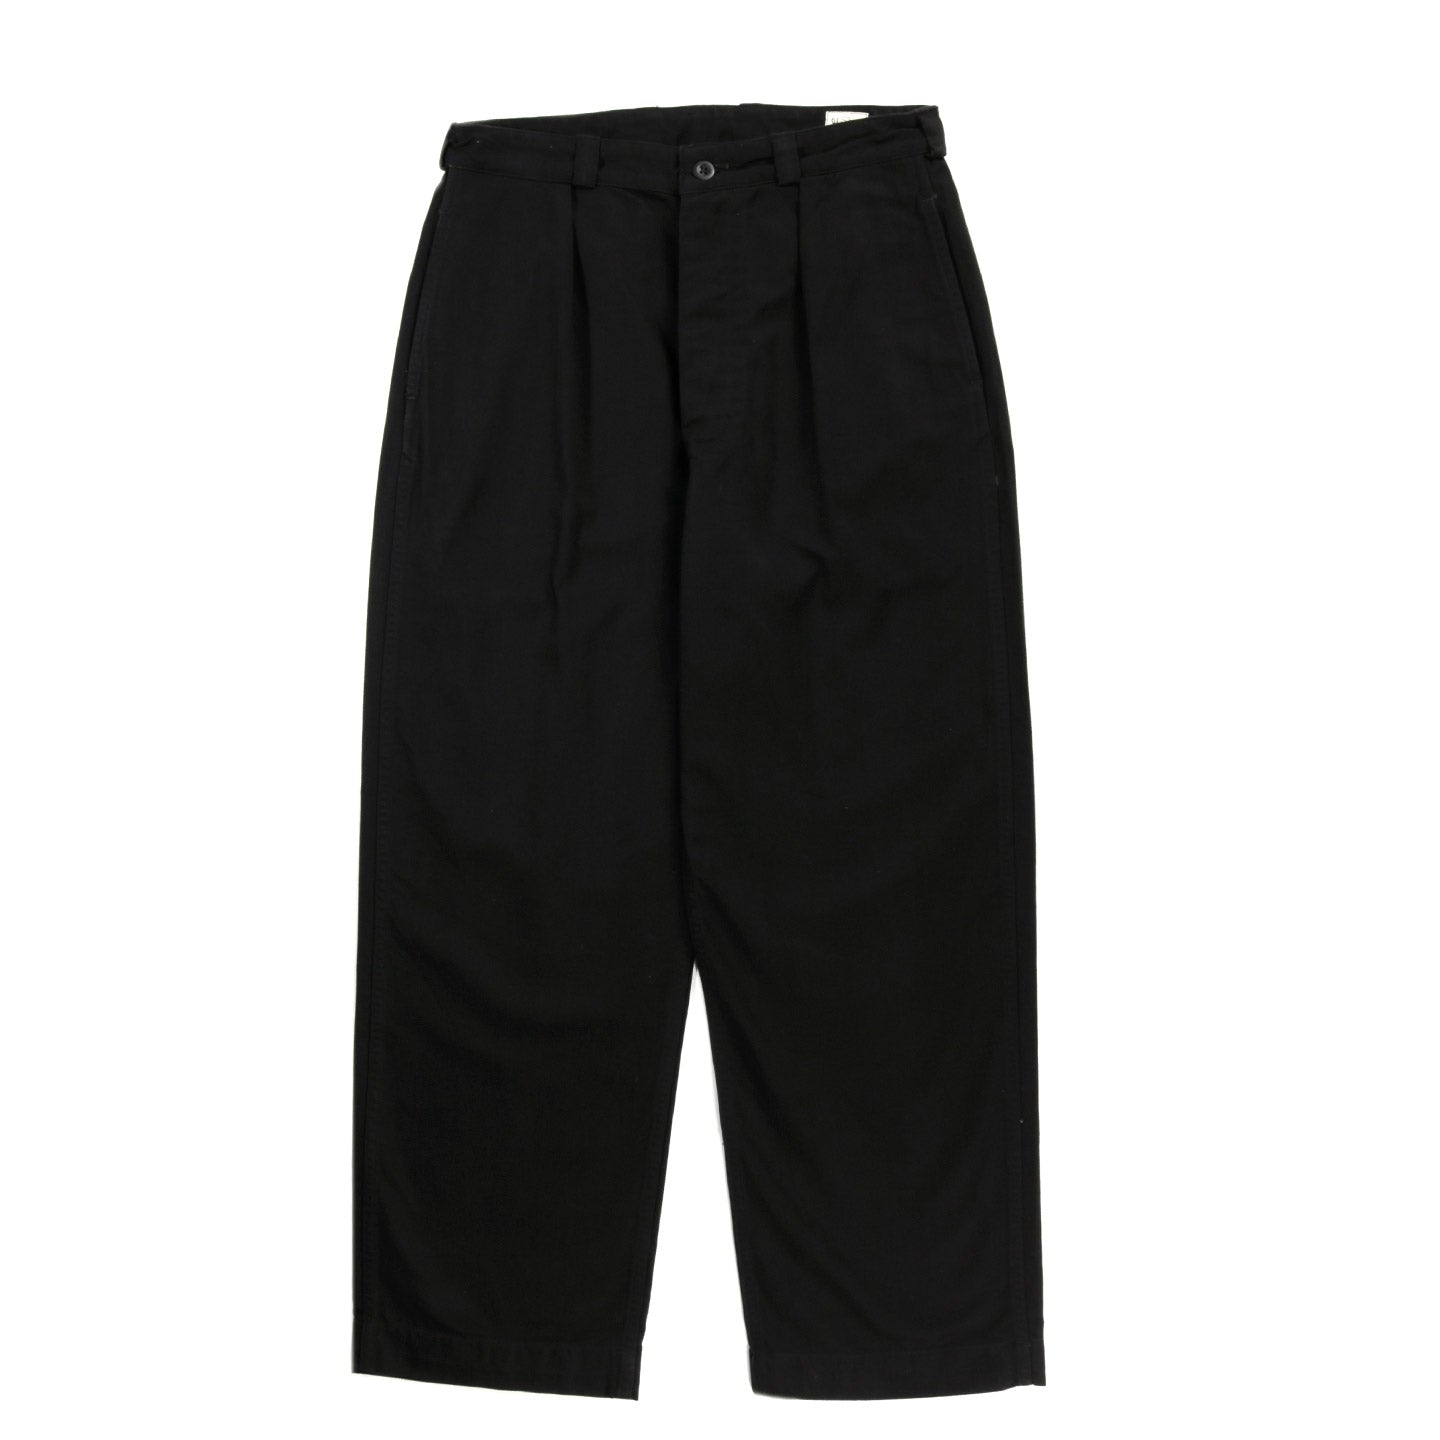 ORSLOW M-52 FRENCH ARMY TROUSER WIDE FIT BLACK